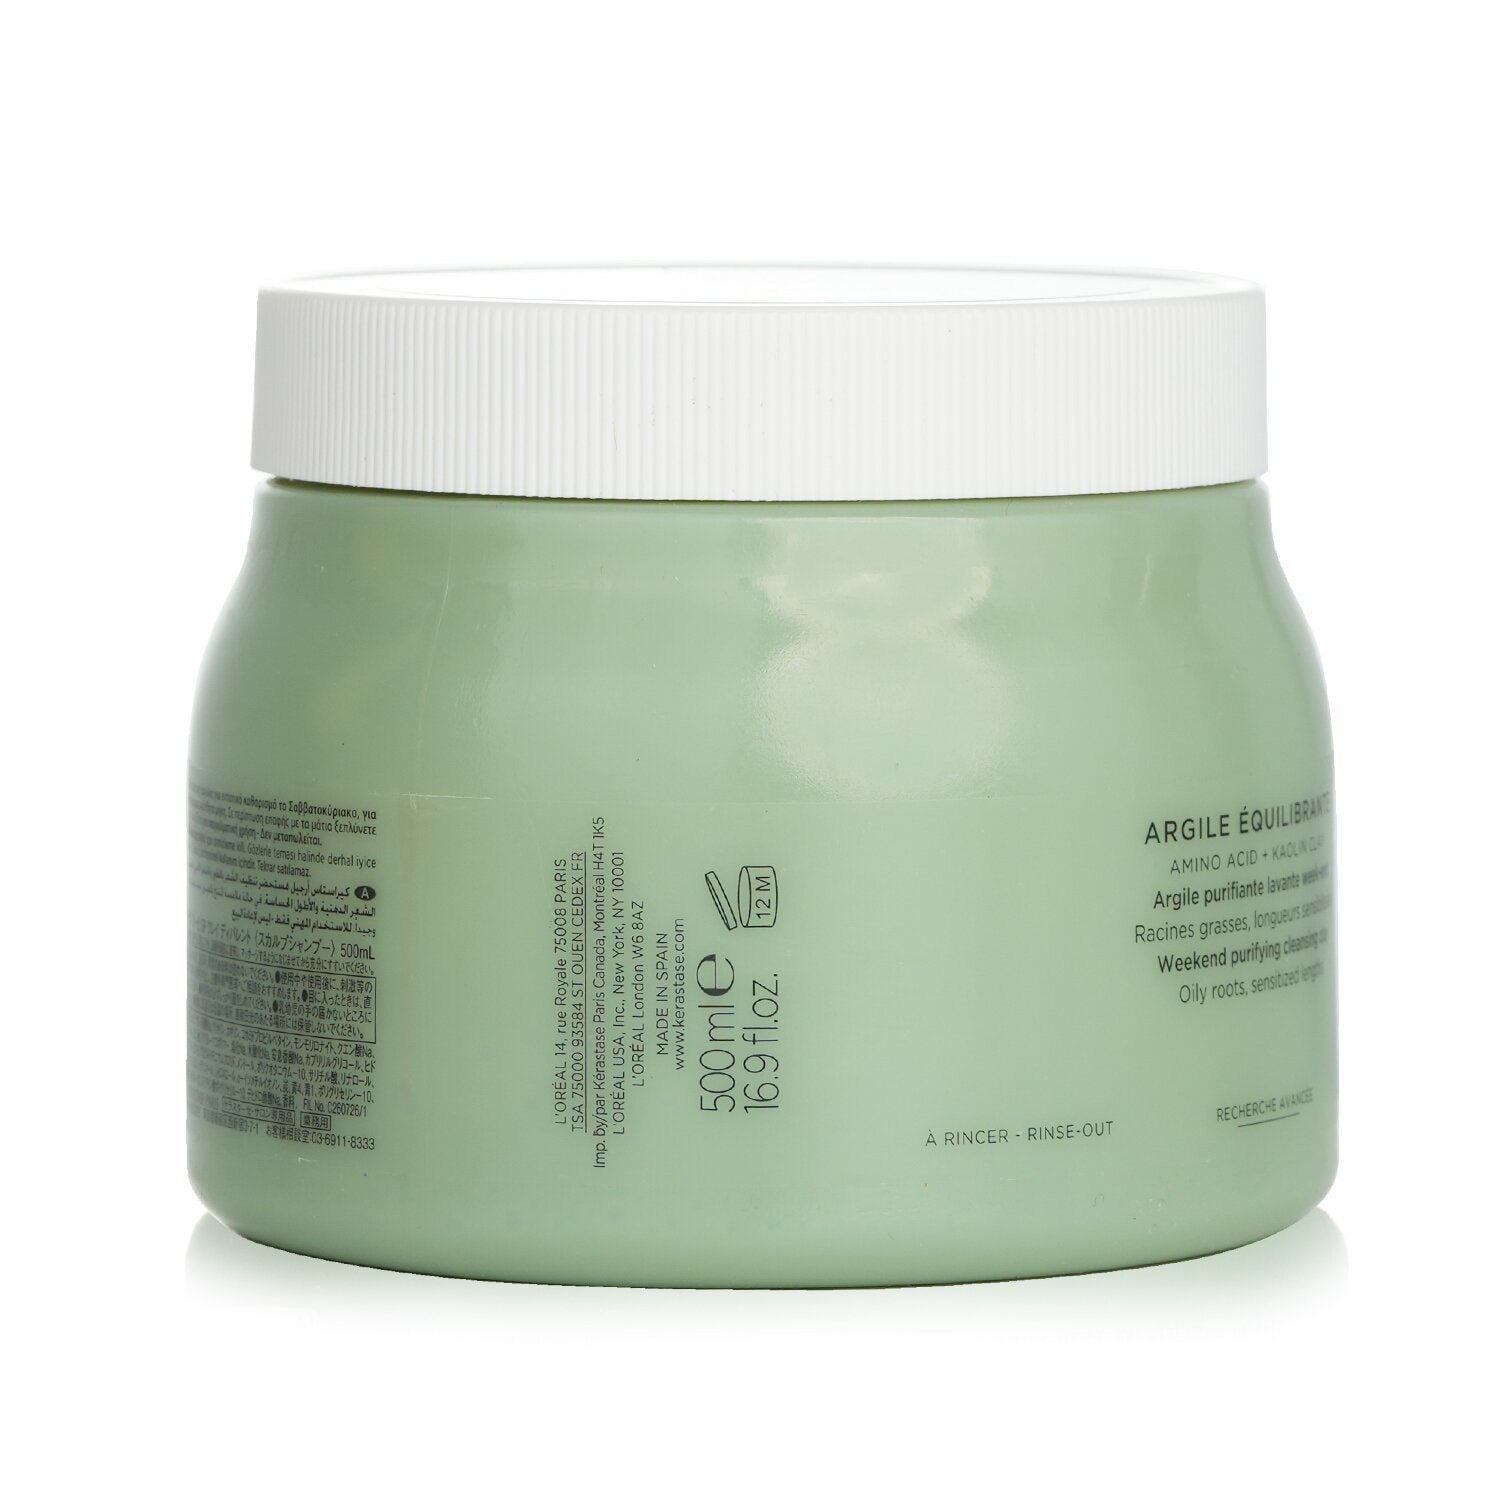 KERASTASE - Specifique Argile Equilibrante Cleansing Clay (For Oily Roots & Sensitive Lengths) - 500ml/16.9oz 3P's Inclusive Beauty